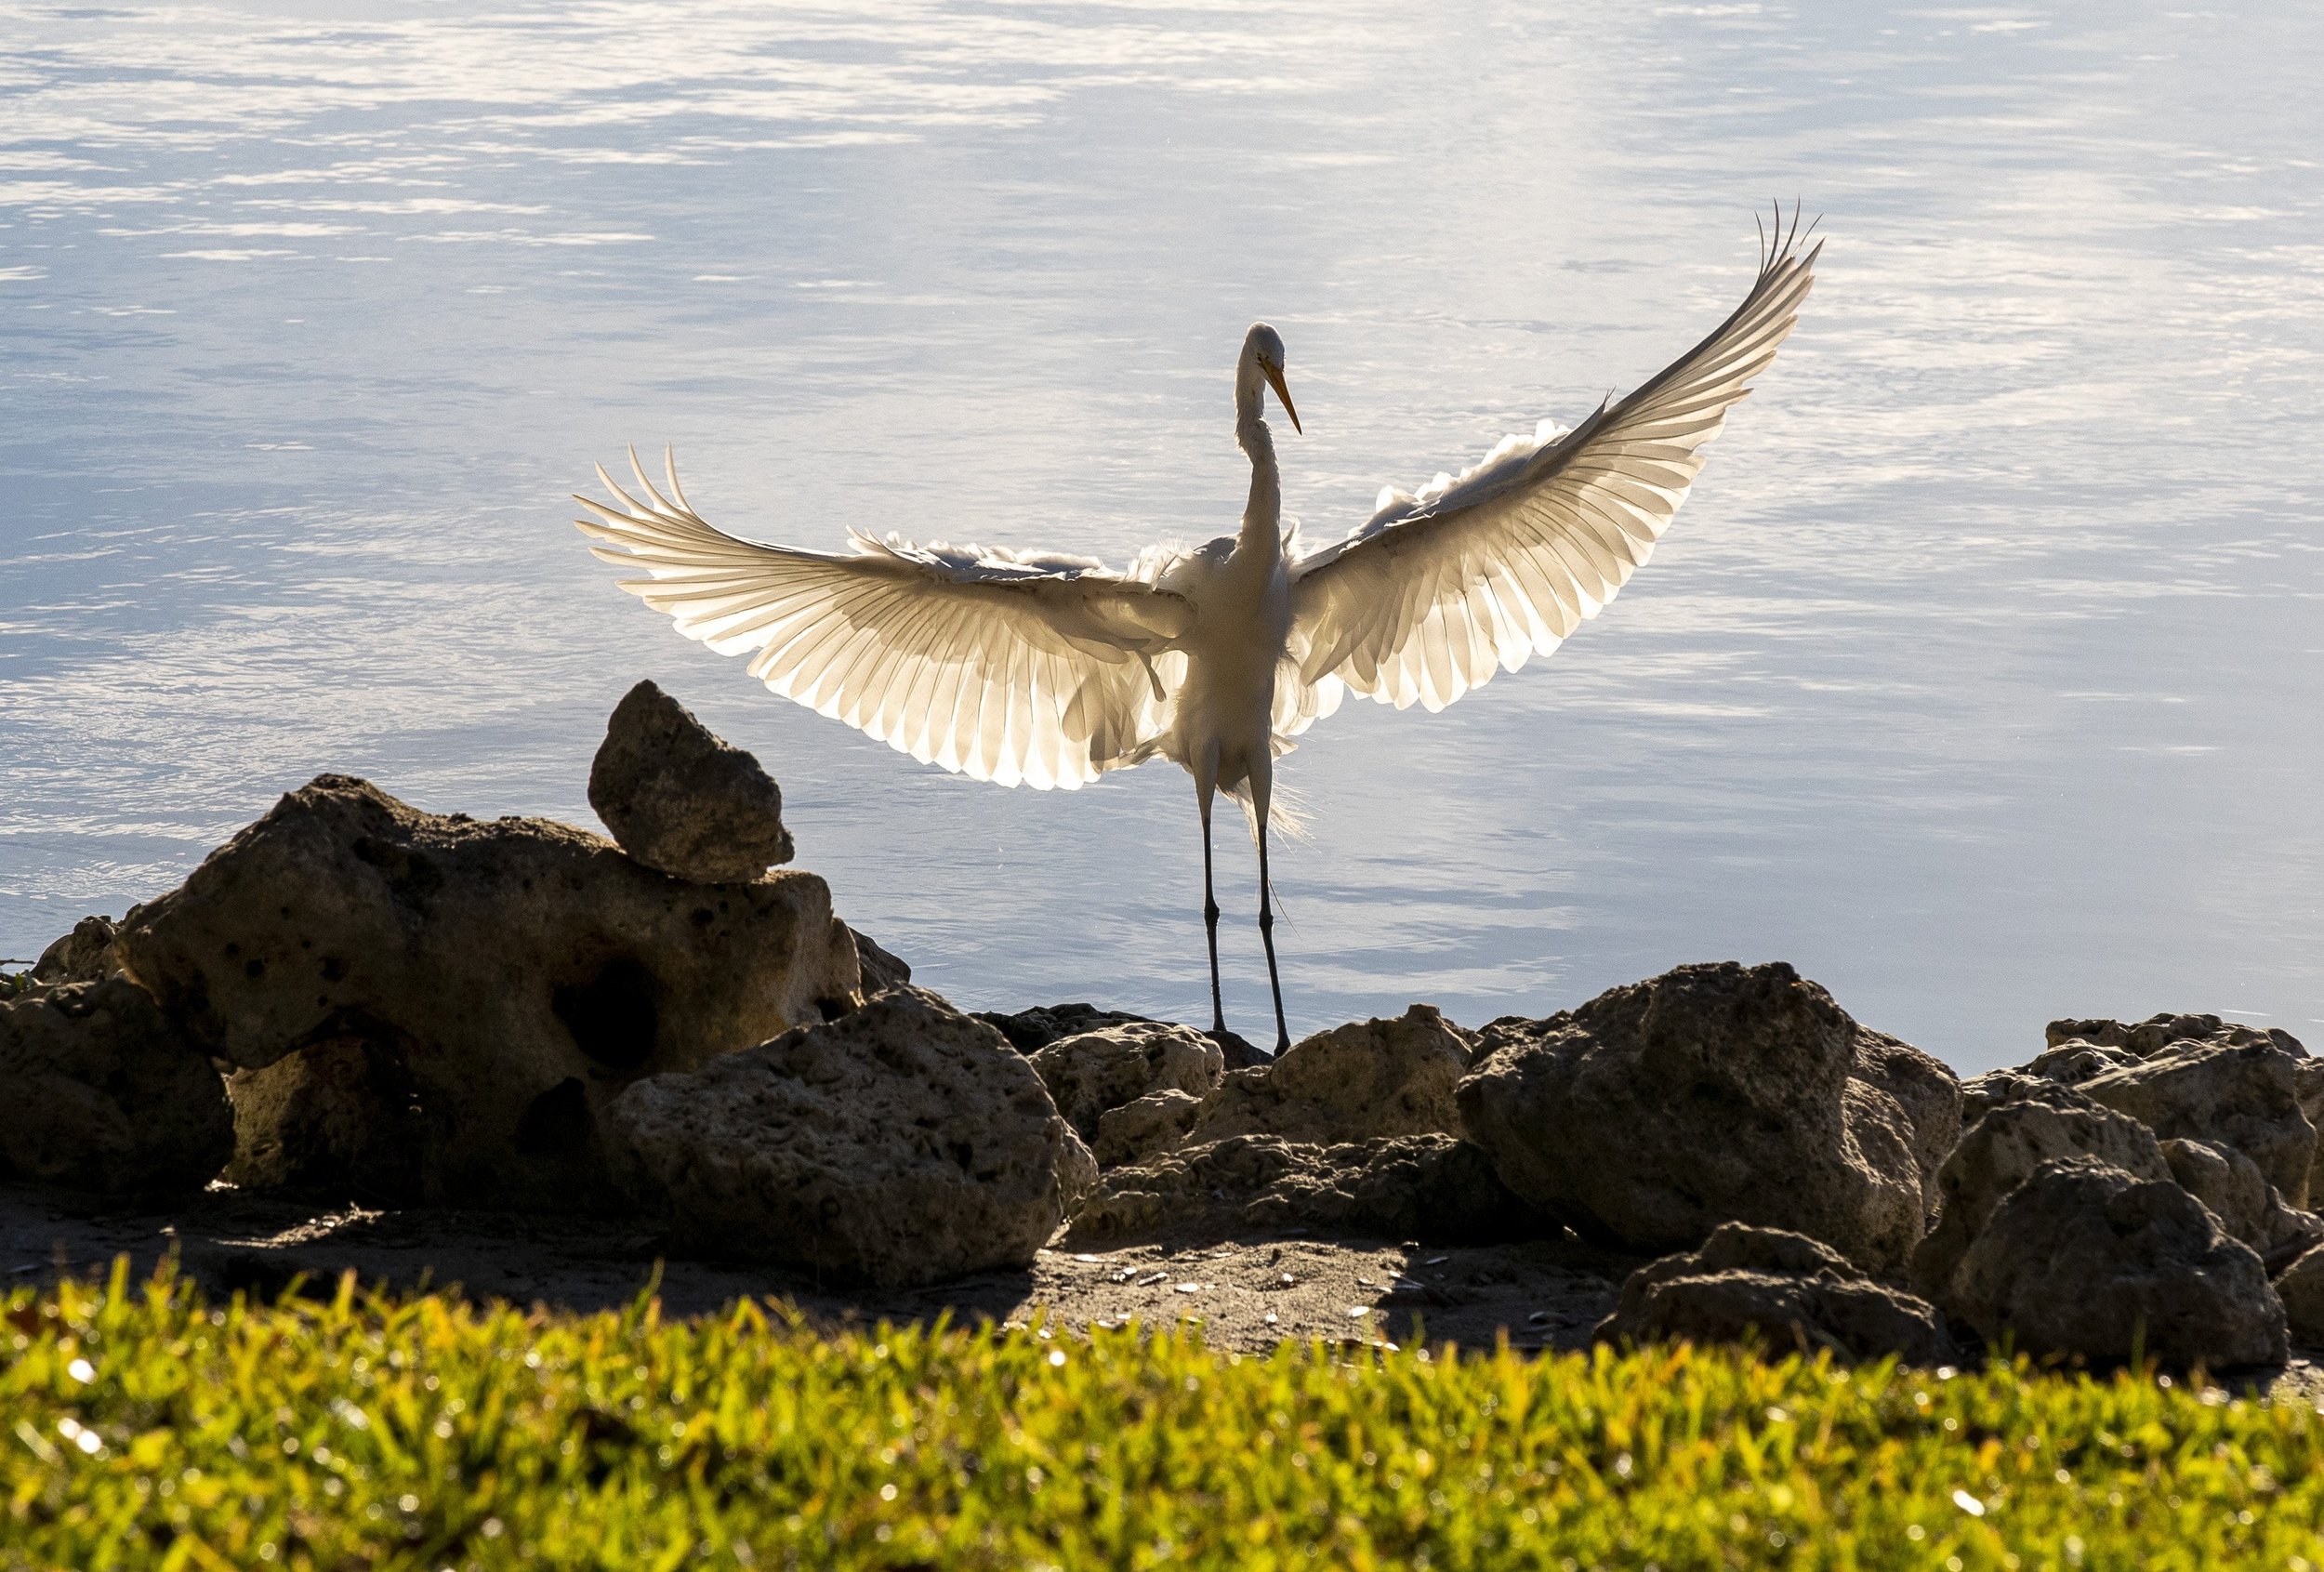  A great egret lands and spreads its wings along the shores of the lake at Cranes Roost Park in Altamonte Springs on Wednesday, Jan. 20, 2021.  